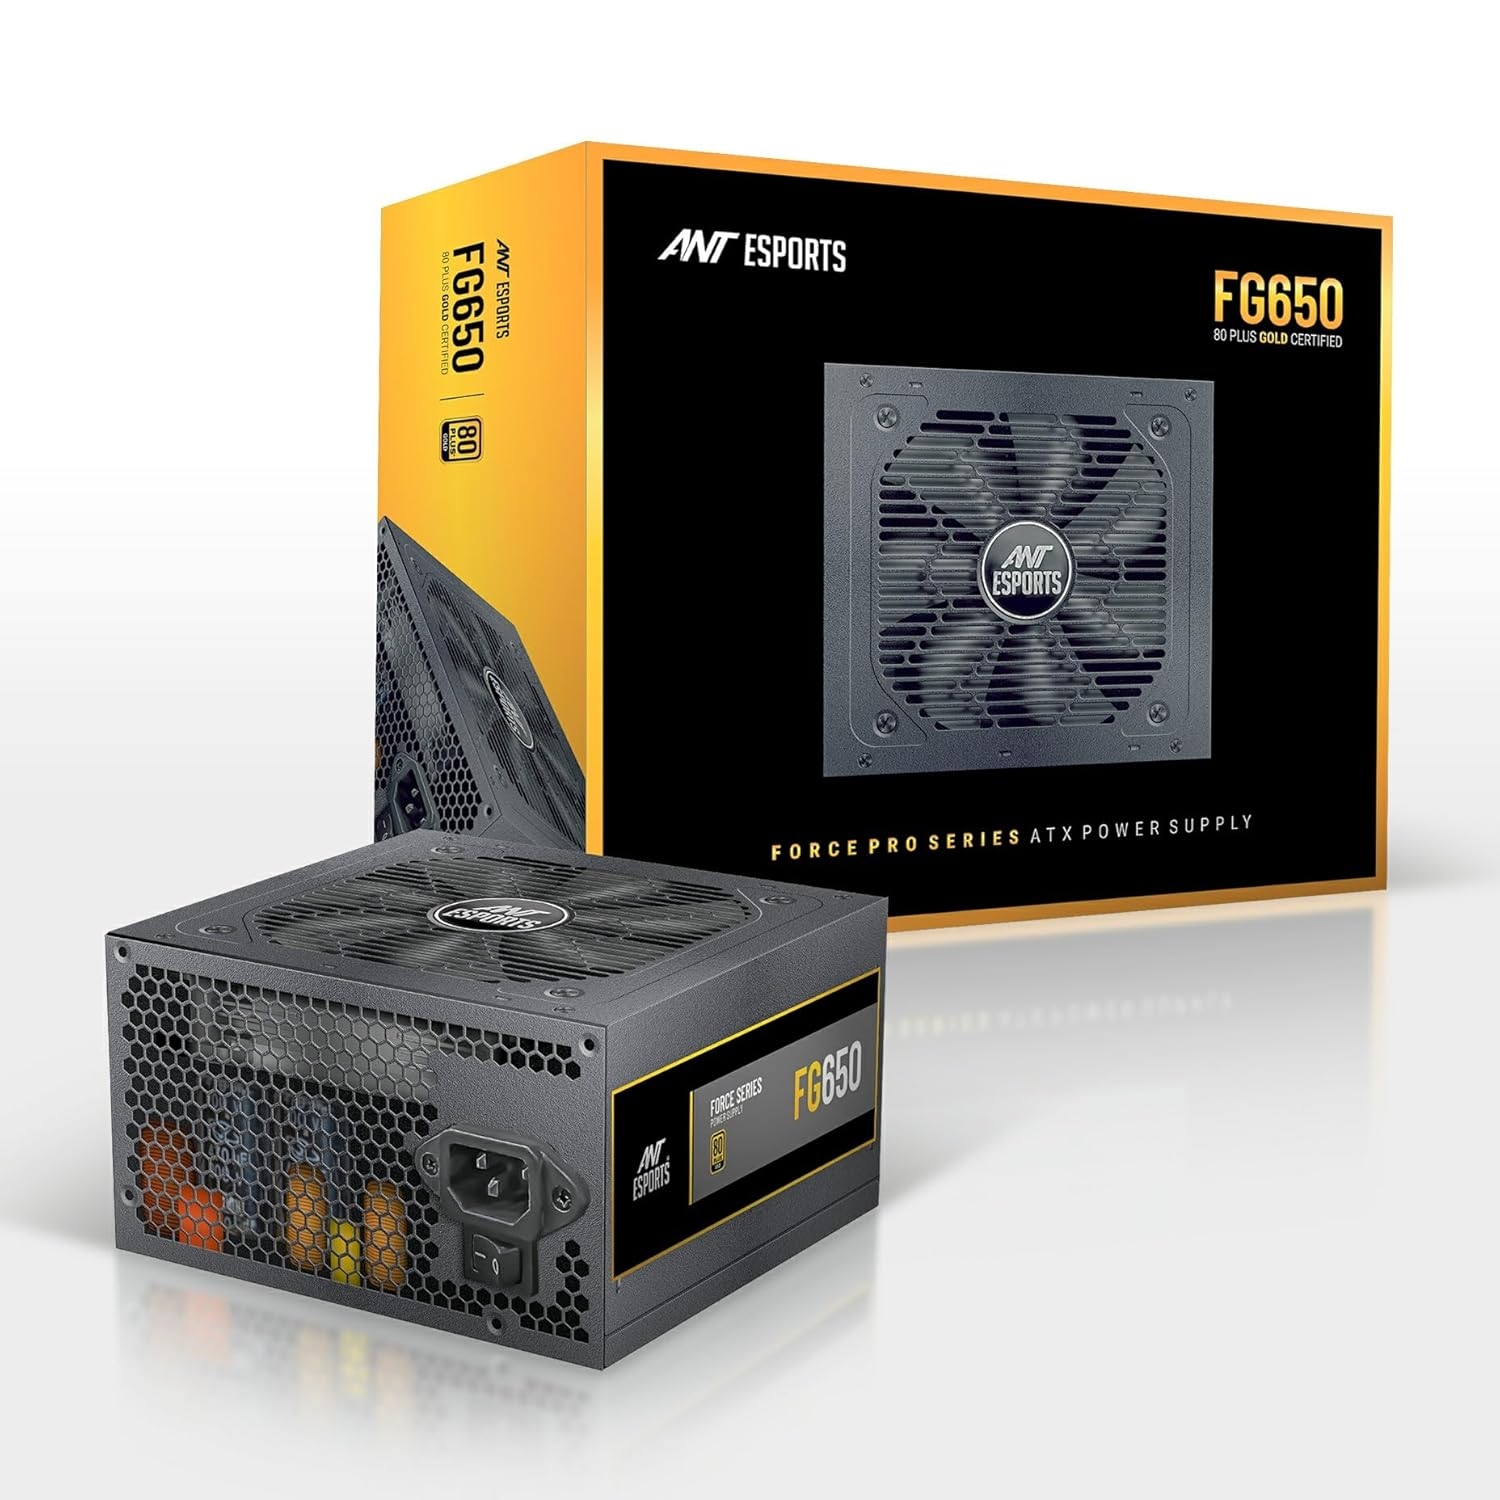 Ant Esports FG650 Gaming Power Supply I Force Series 80 Plus Gold Certified PSU I 120mm Silent Fan I 8 Pin (4+4) CPU connector I 3 Years Warranty SMPS Power Supply Units